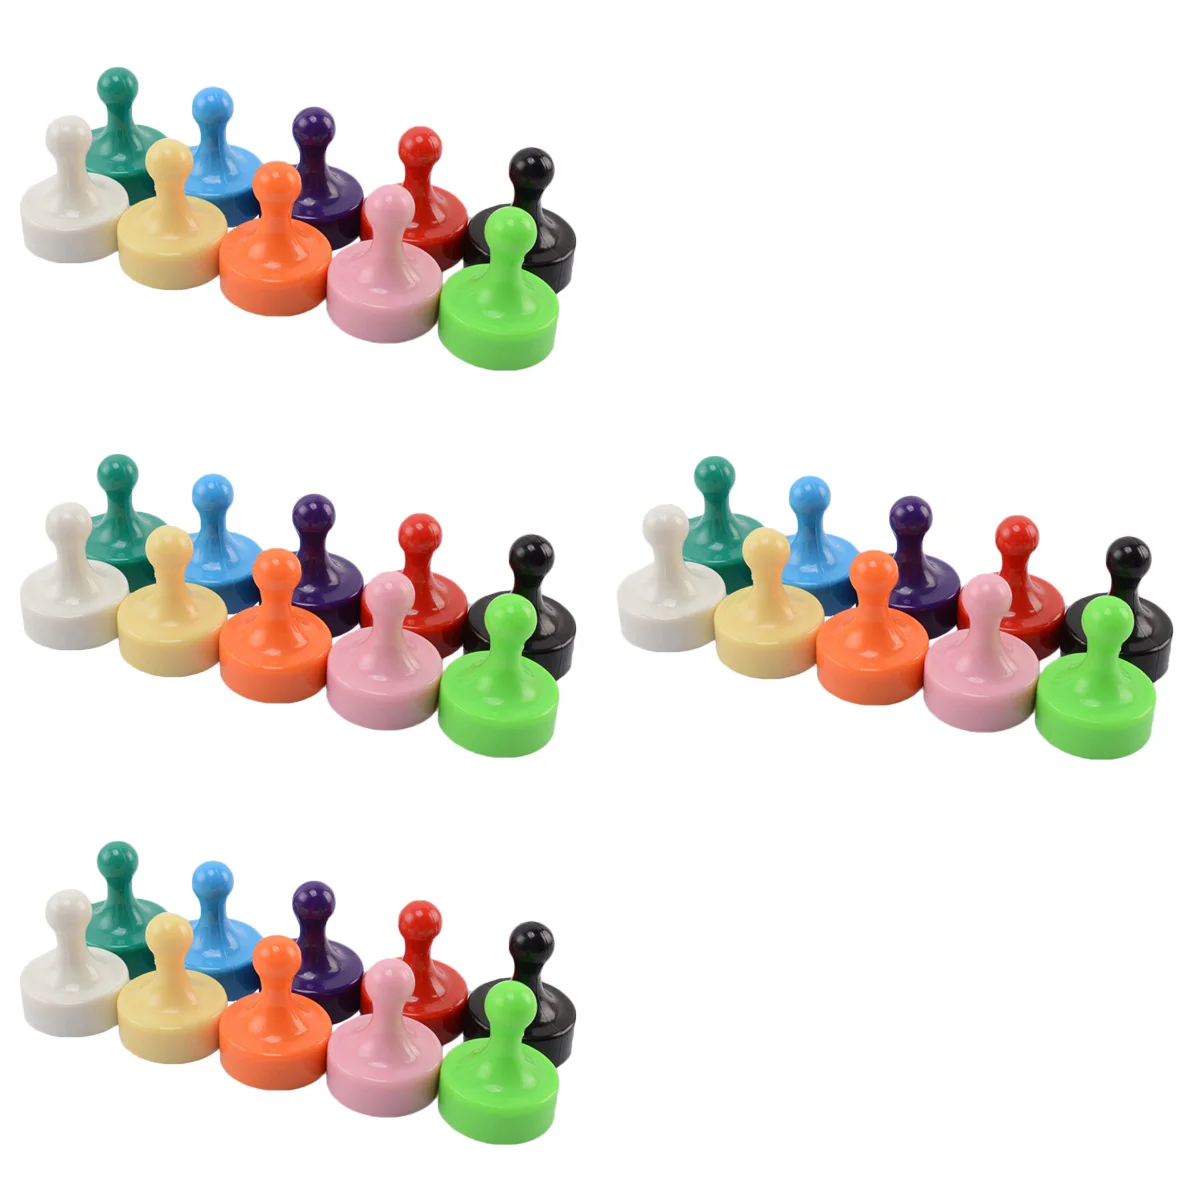 

40 Pcs Push Pin Magnets Small Fridge Magnets for Whiteboard Map Refrigerator Classroom